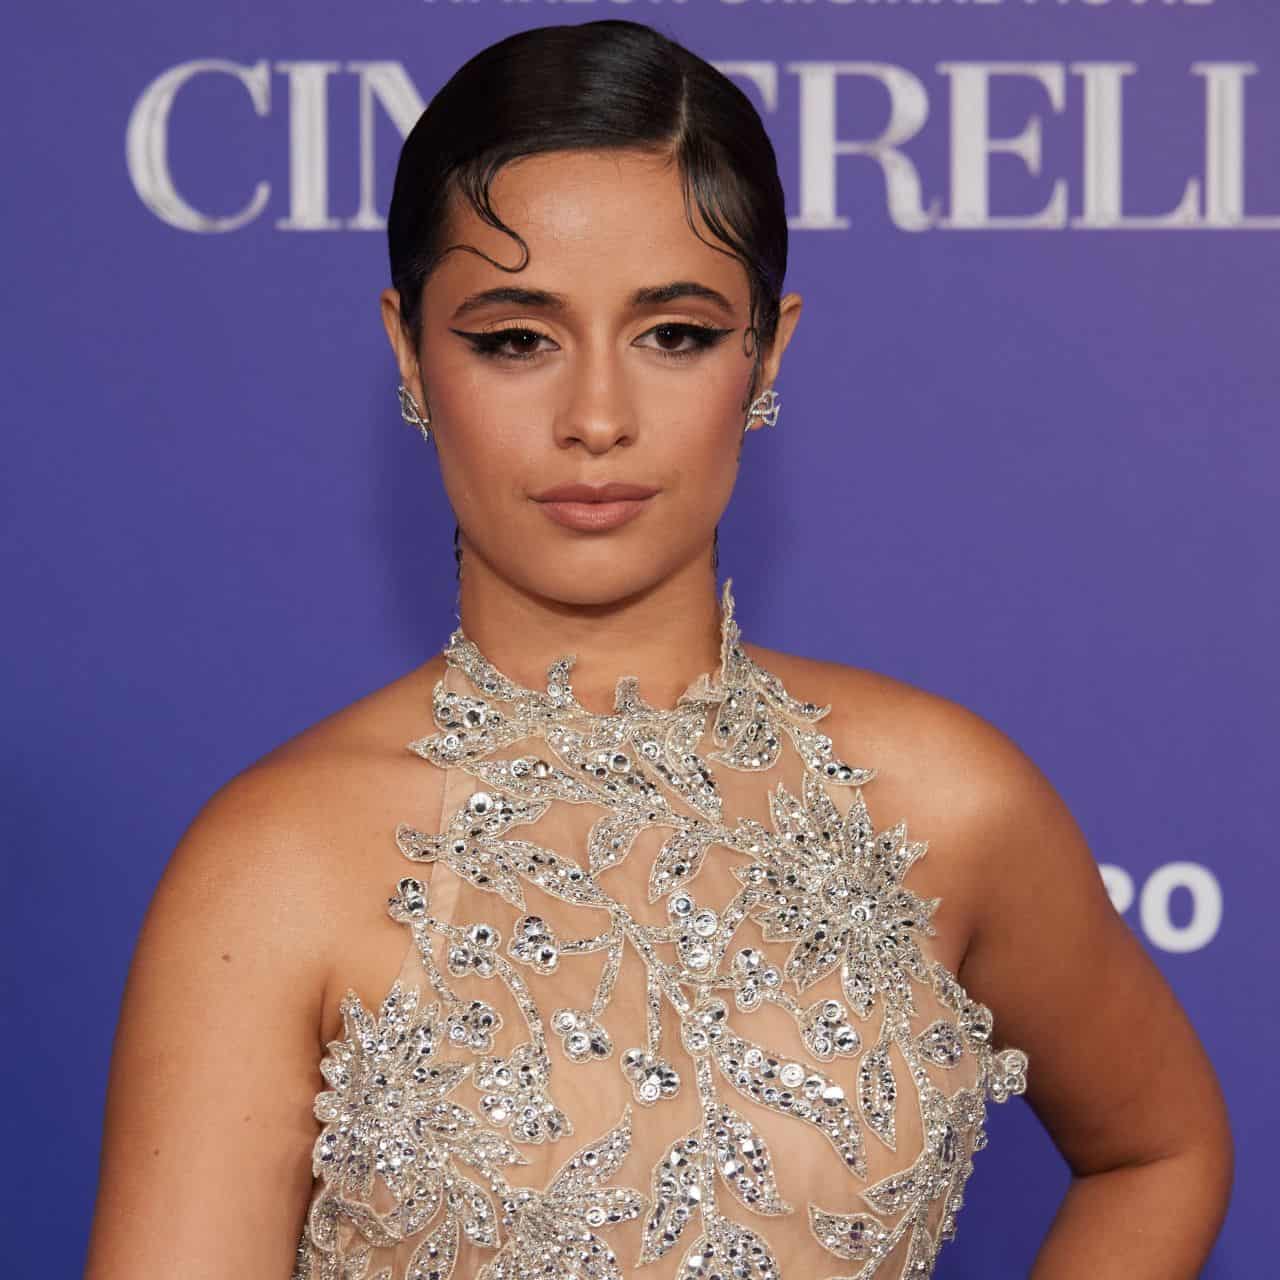 Camila Cabello's Edgy Look Steals the Show at "Cinderella" Premiere